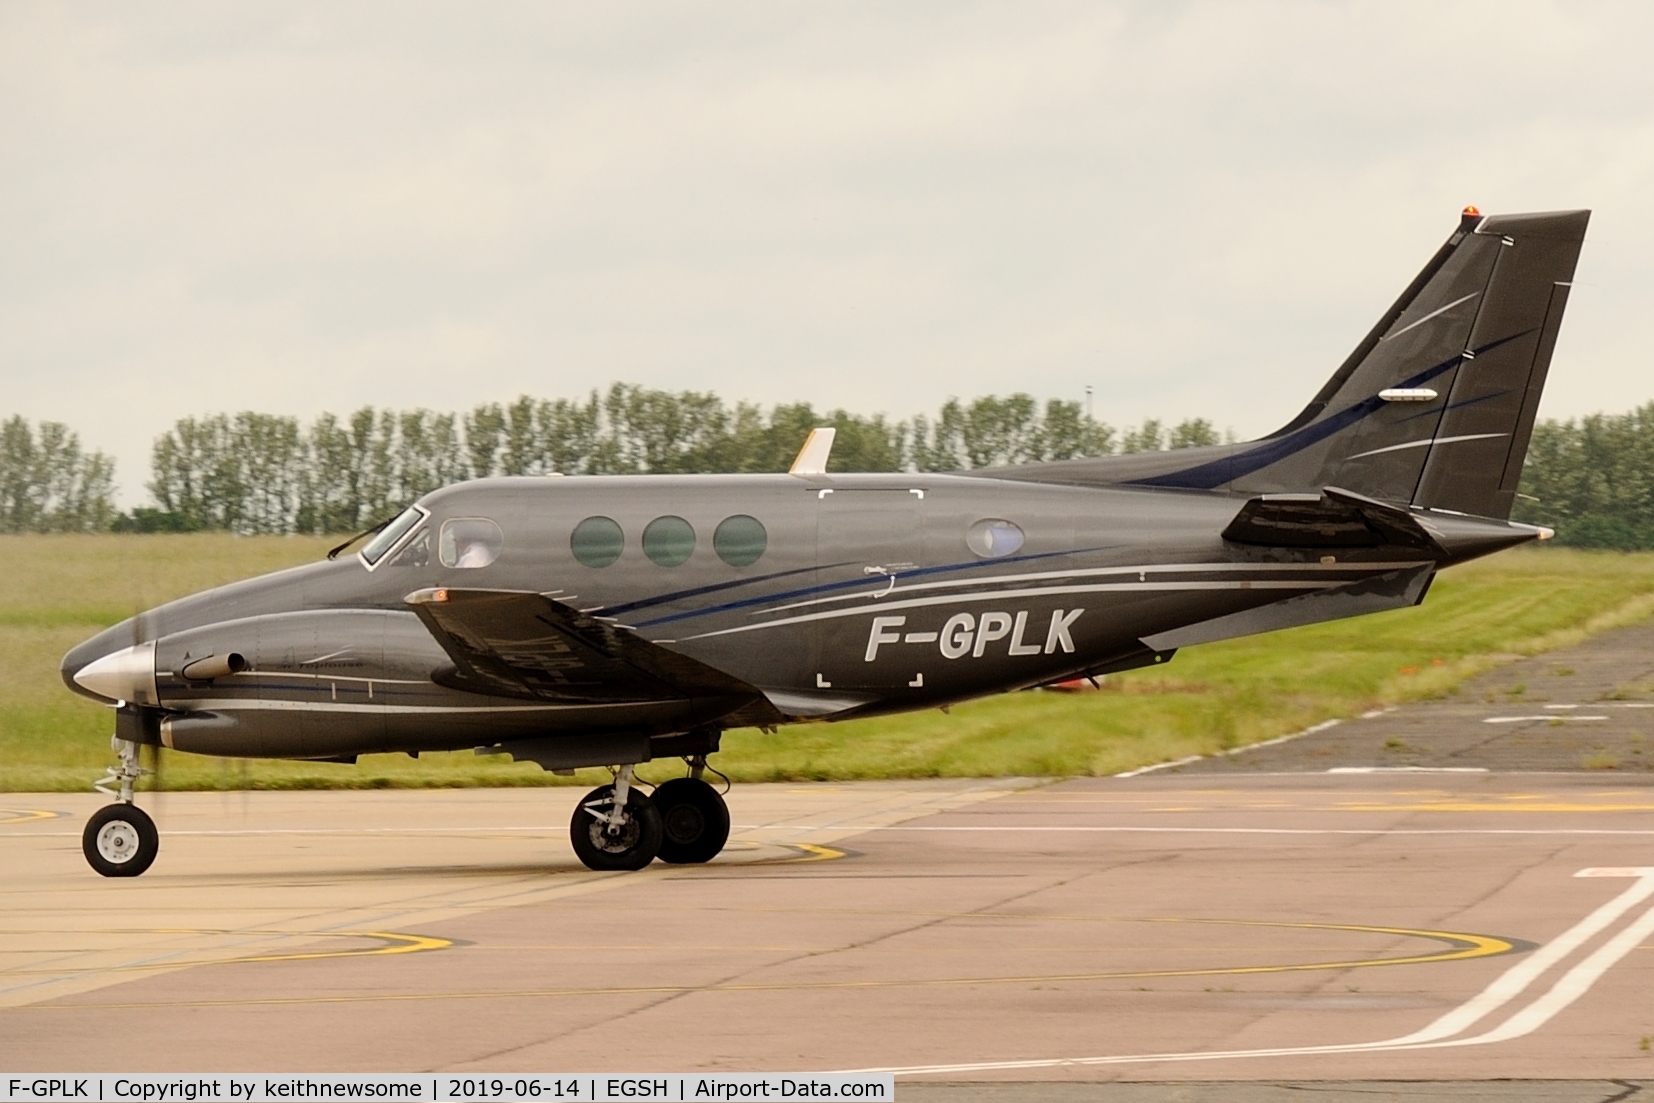 F-GPLK, 1995 Beech C90A King Air King Air C/N LJ-1391, Arriving at Norwich from Toulouse.